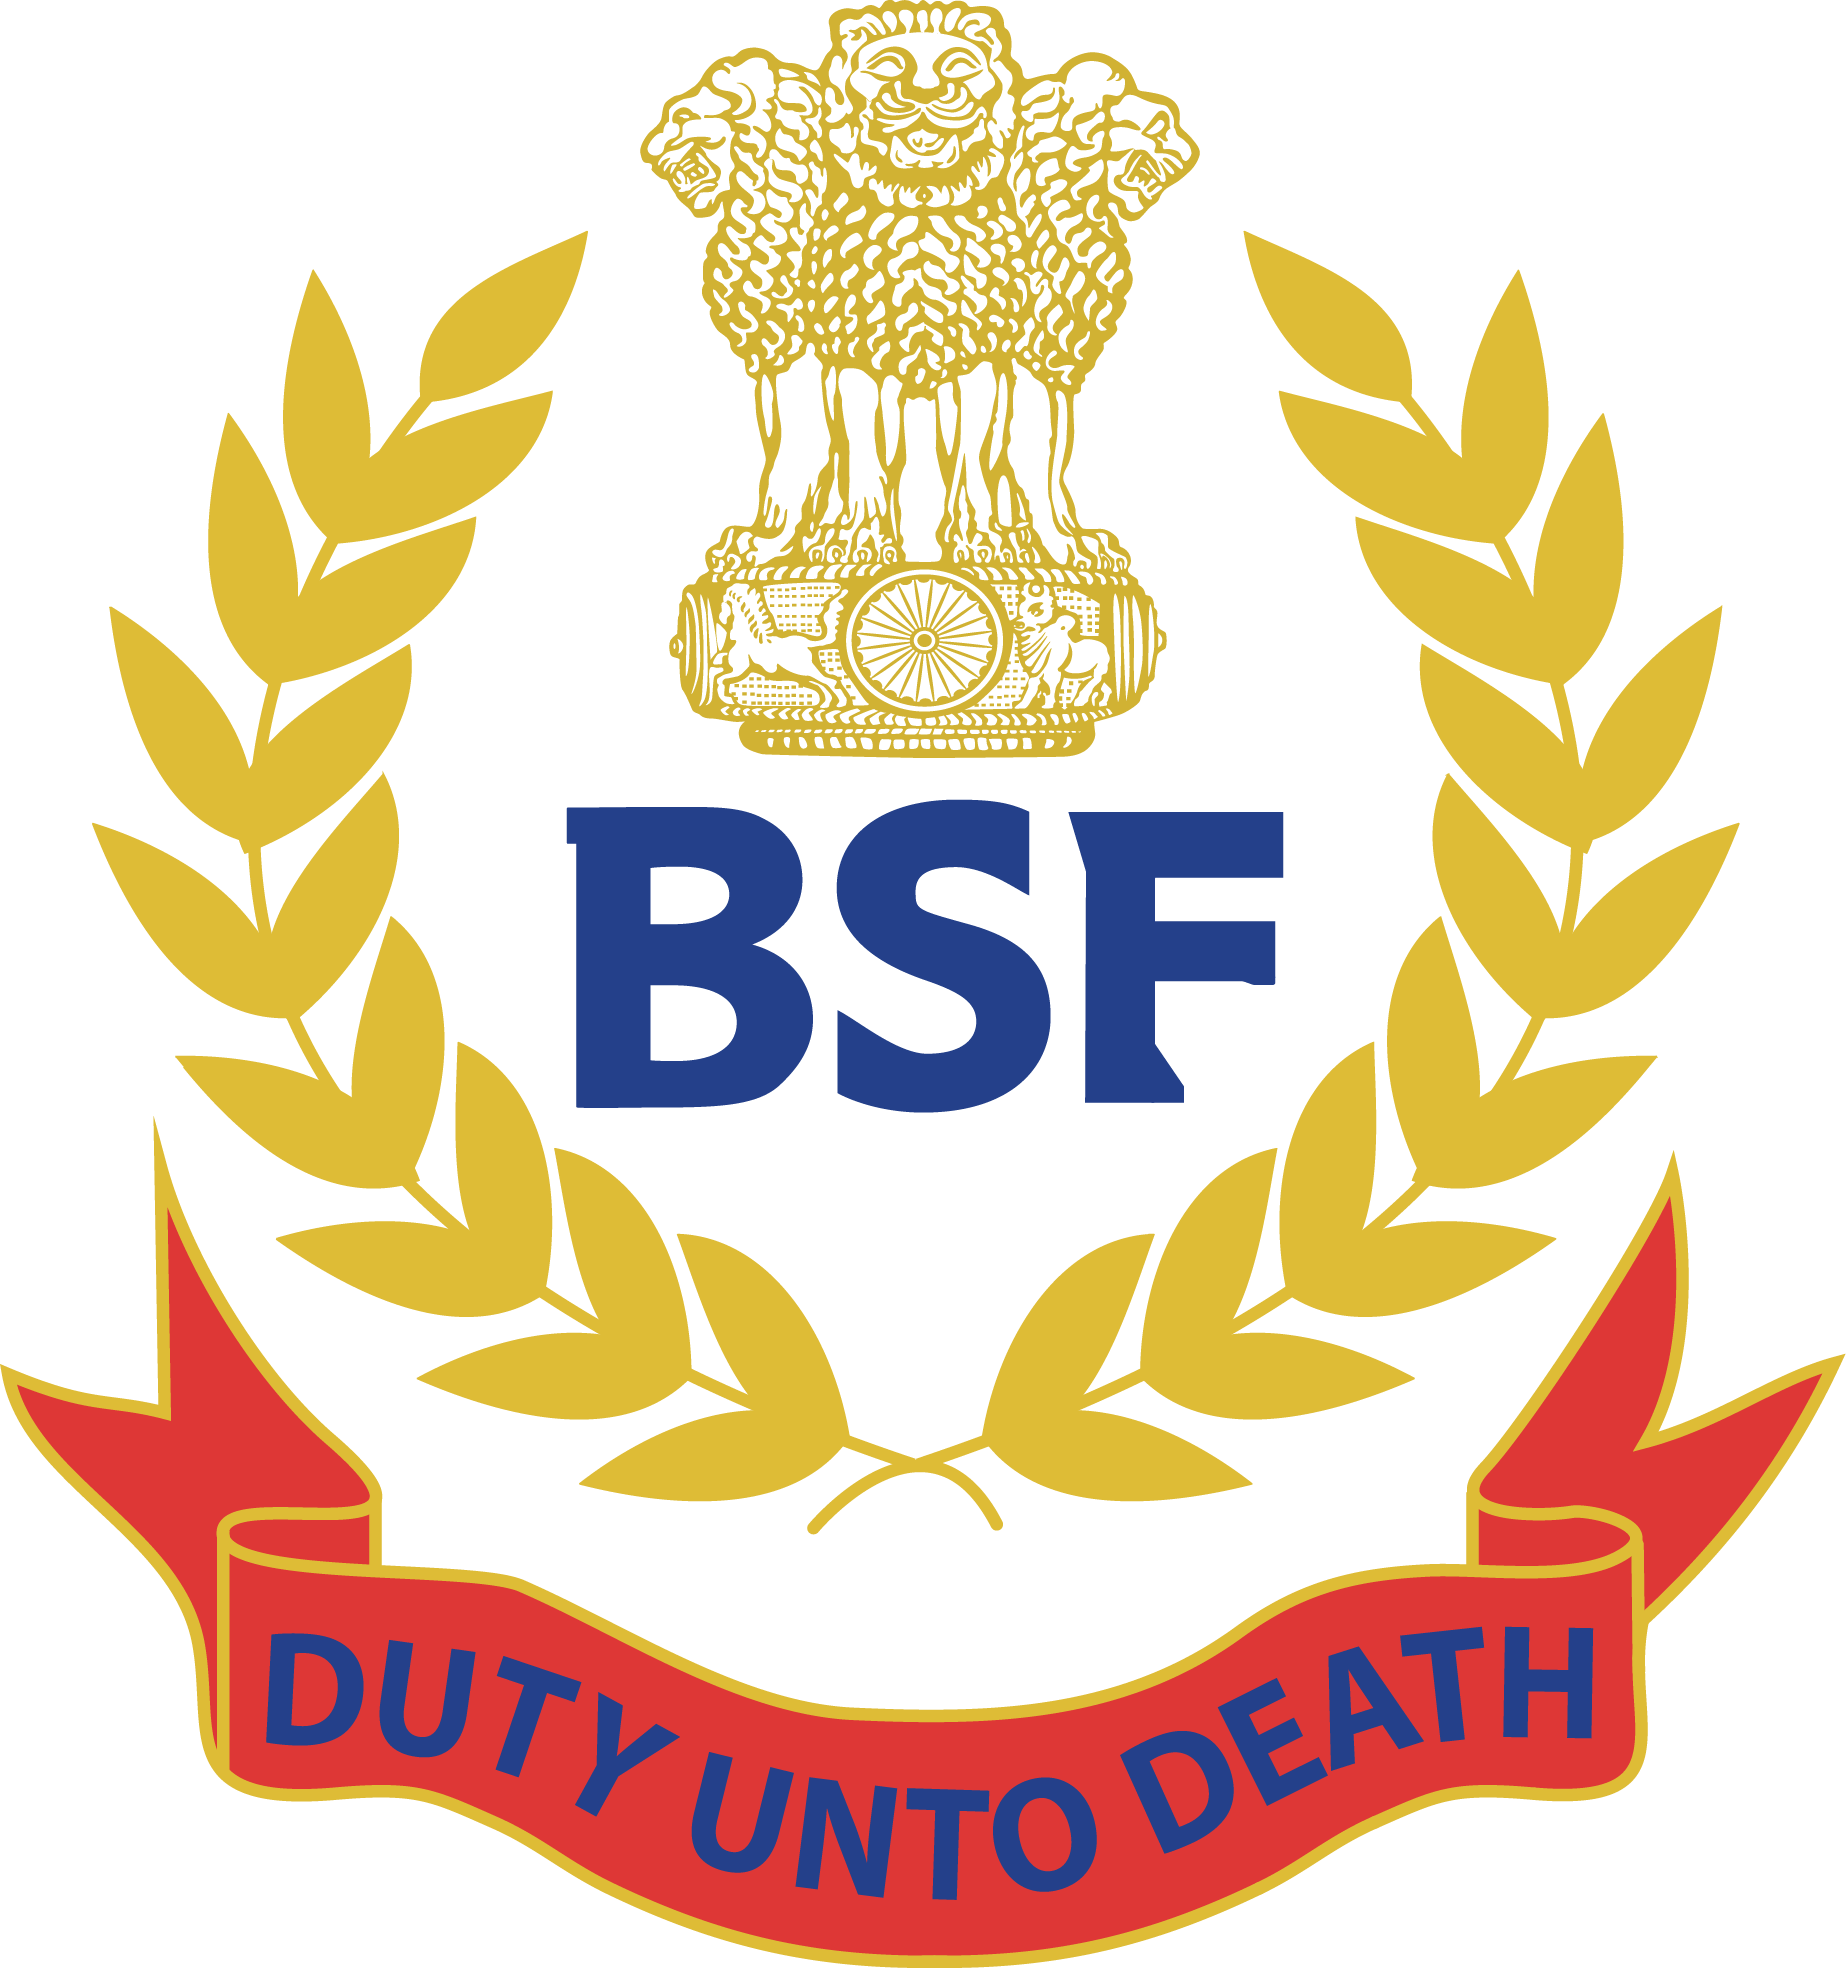 BSF Logo (Border Security Force) Download Vector.